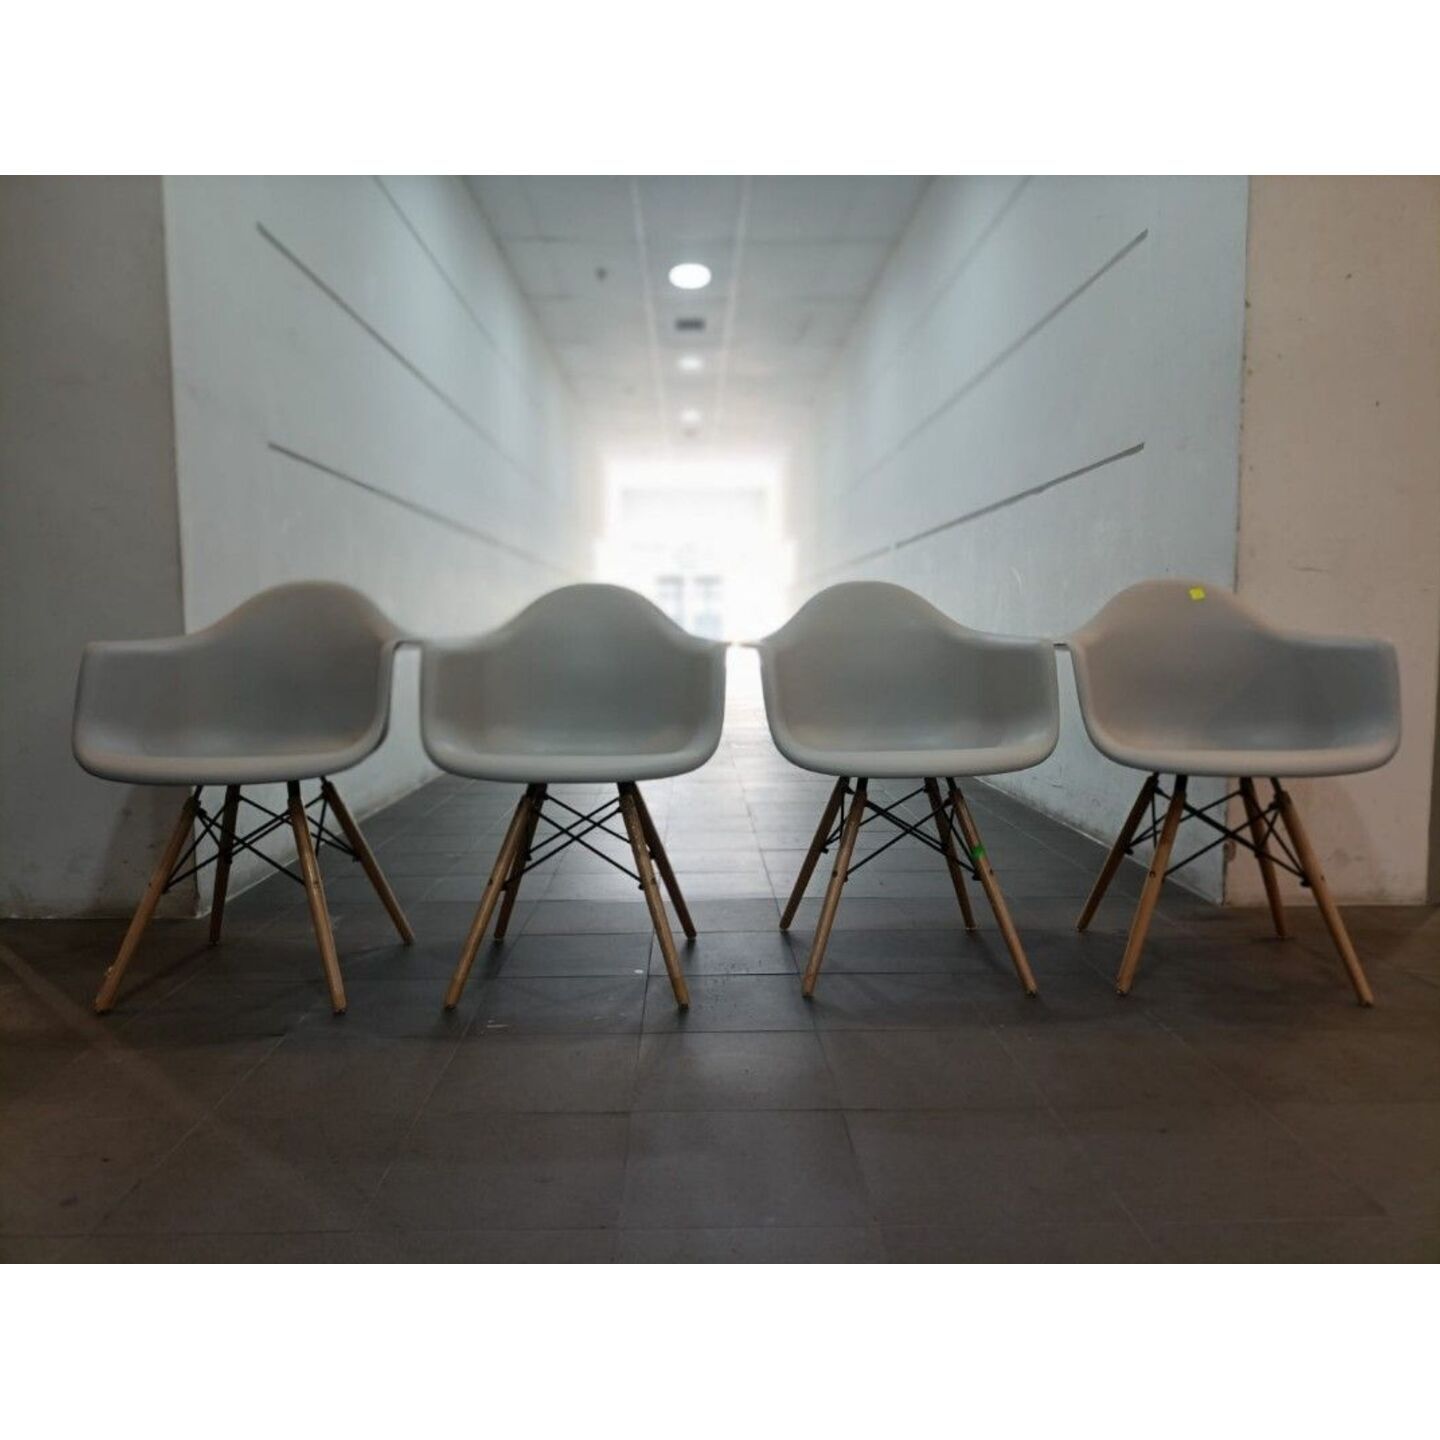 RAYZ Armchairs in LIGHT GREY - SET OF 4